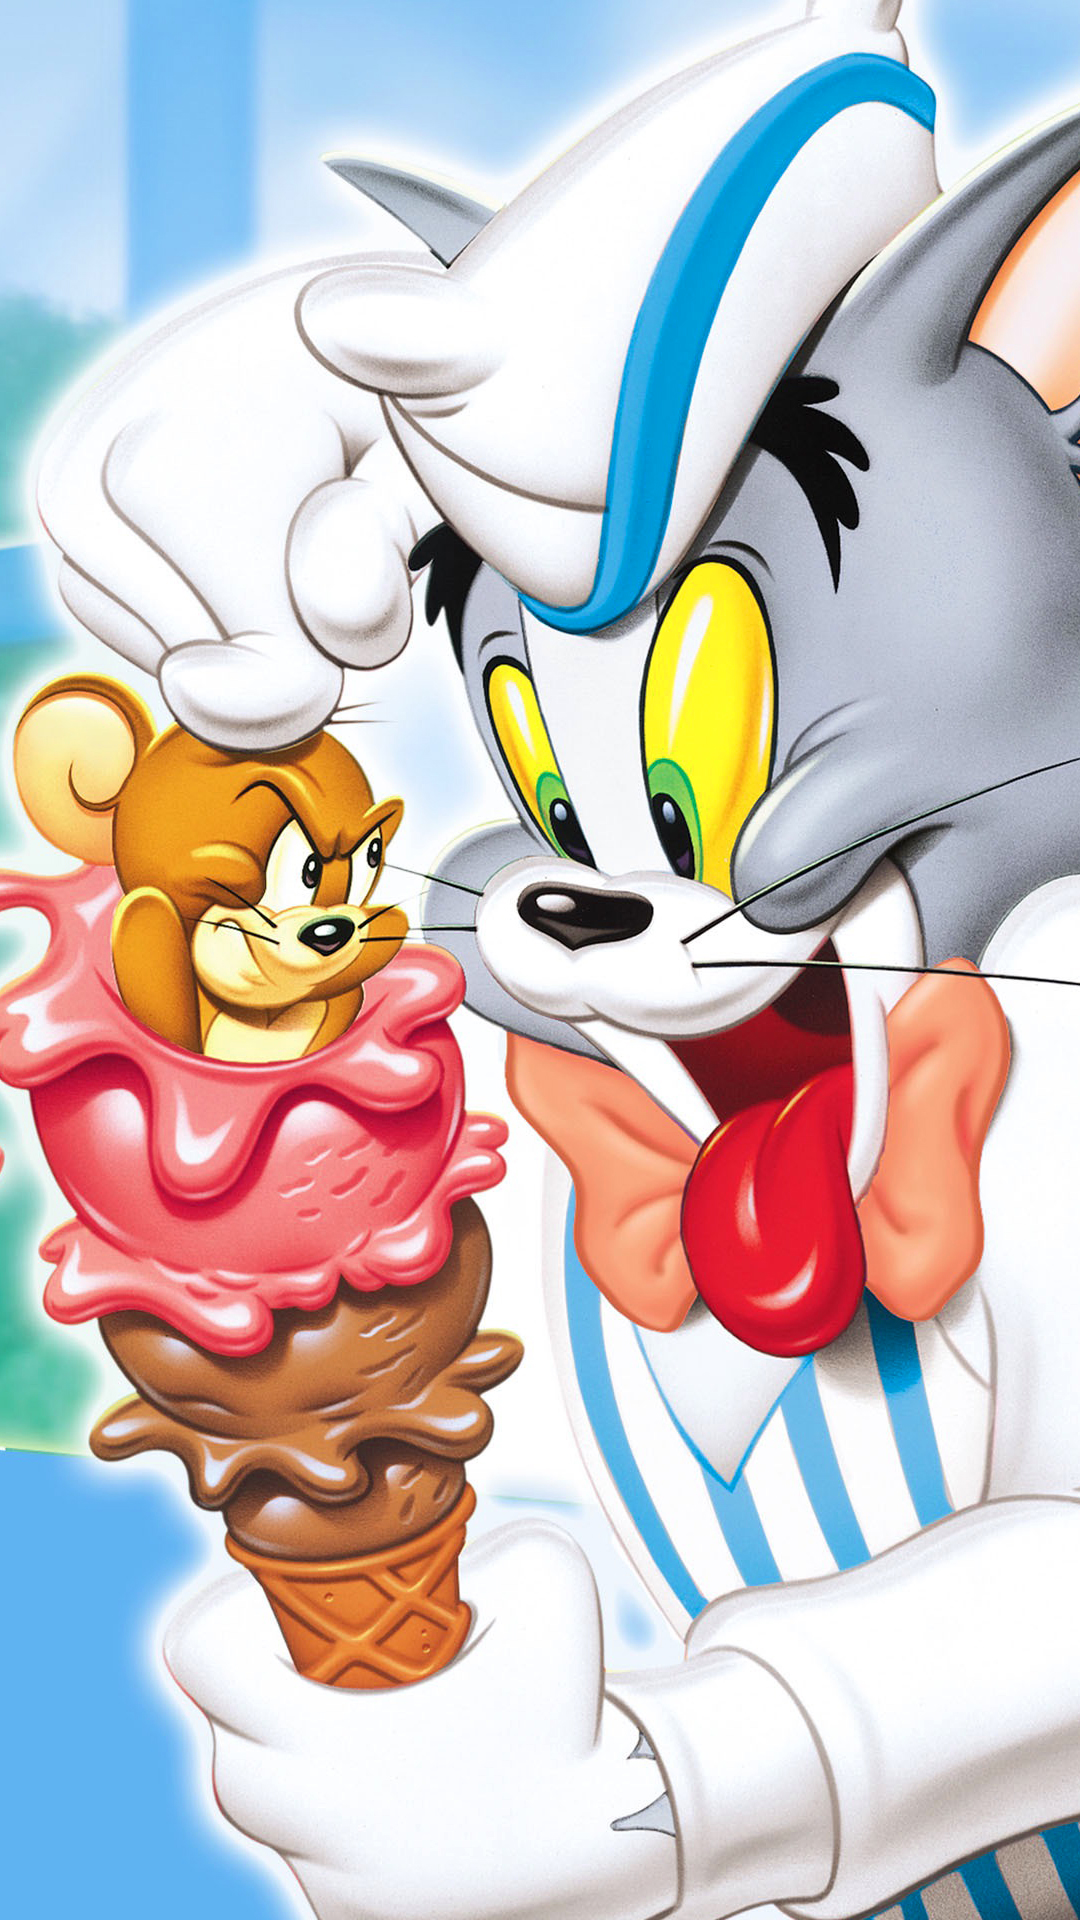 tom-and-jerry-phone-wallpaper-89